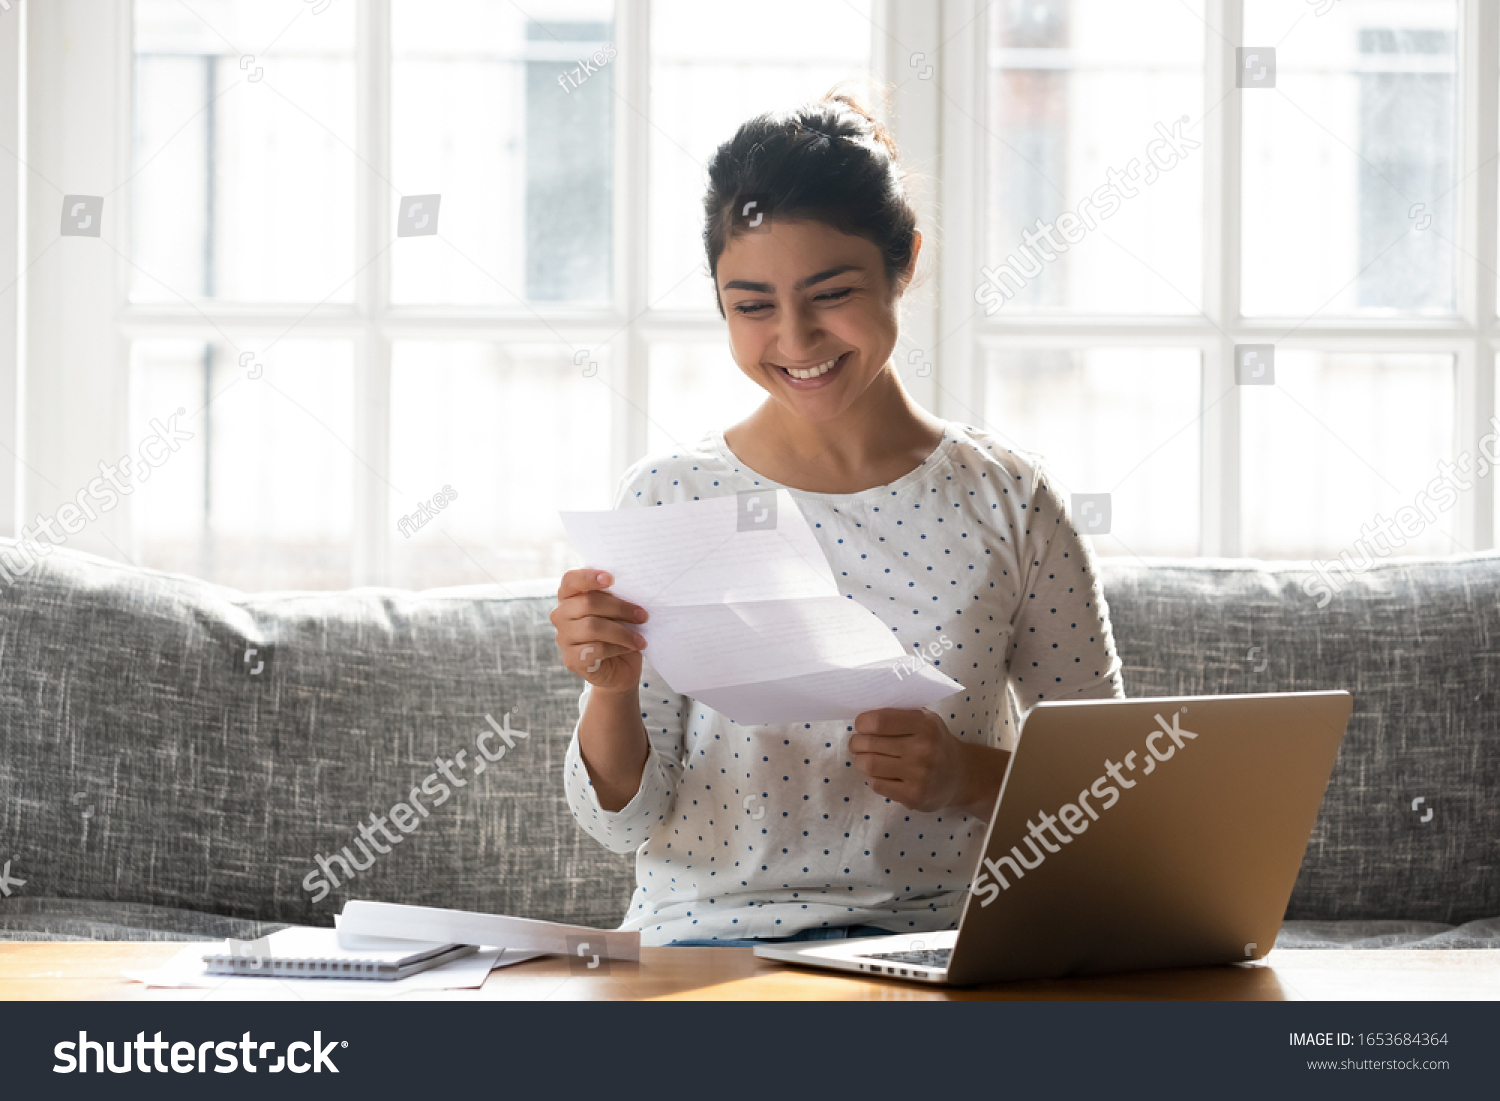 Indian ethnicity woman sitting on couch at home reading paper notice receive good news feels happy, cheerful student female looking at document enjoy exam results or college admission letter concept #1653684364